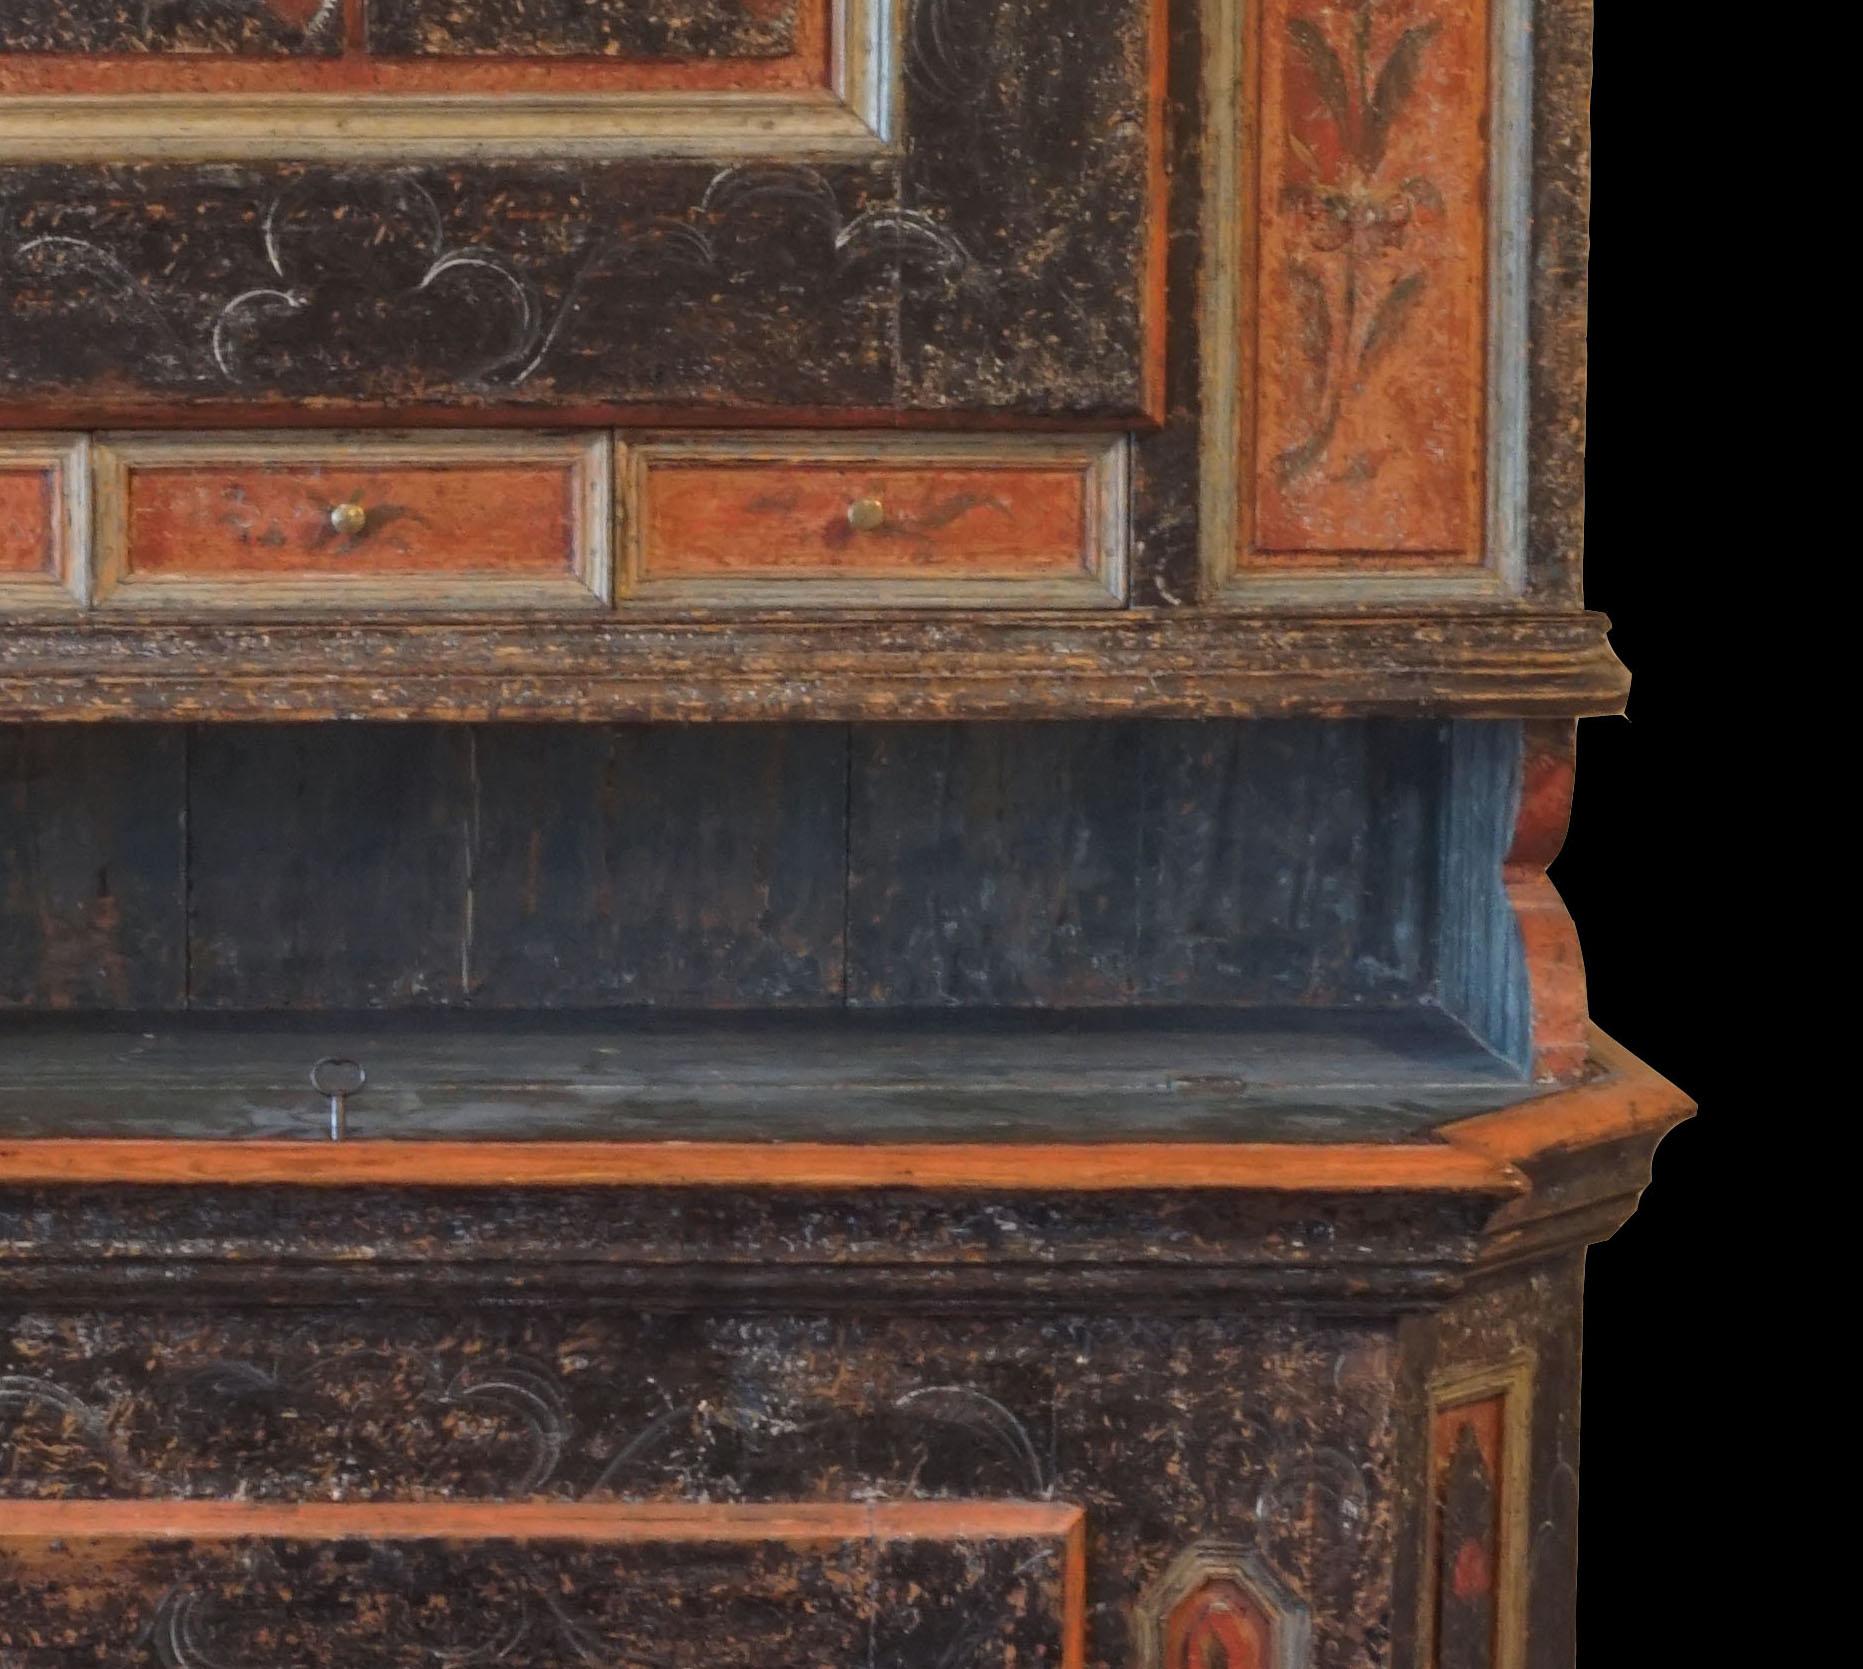 Baroque Original Decorated Early 19th Century Cabinet from Dalarna, Sweden, Dated 1822 For Sale